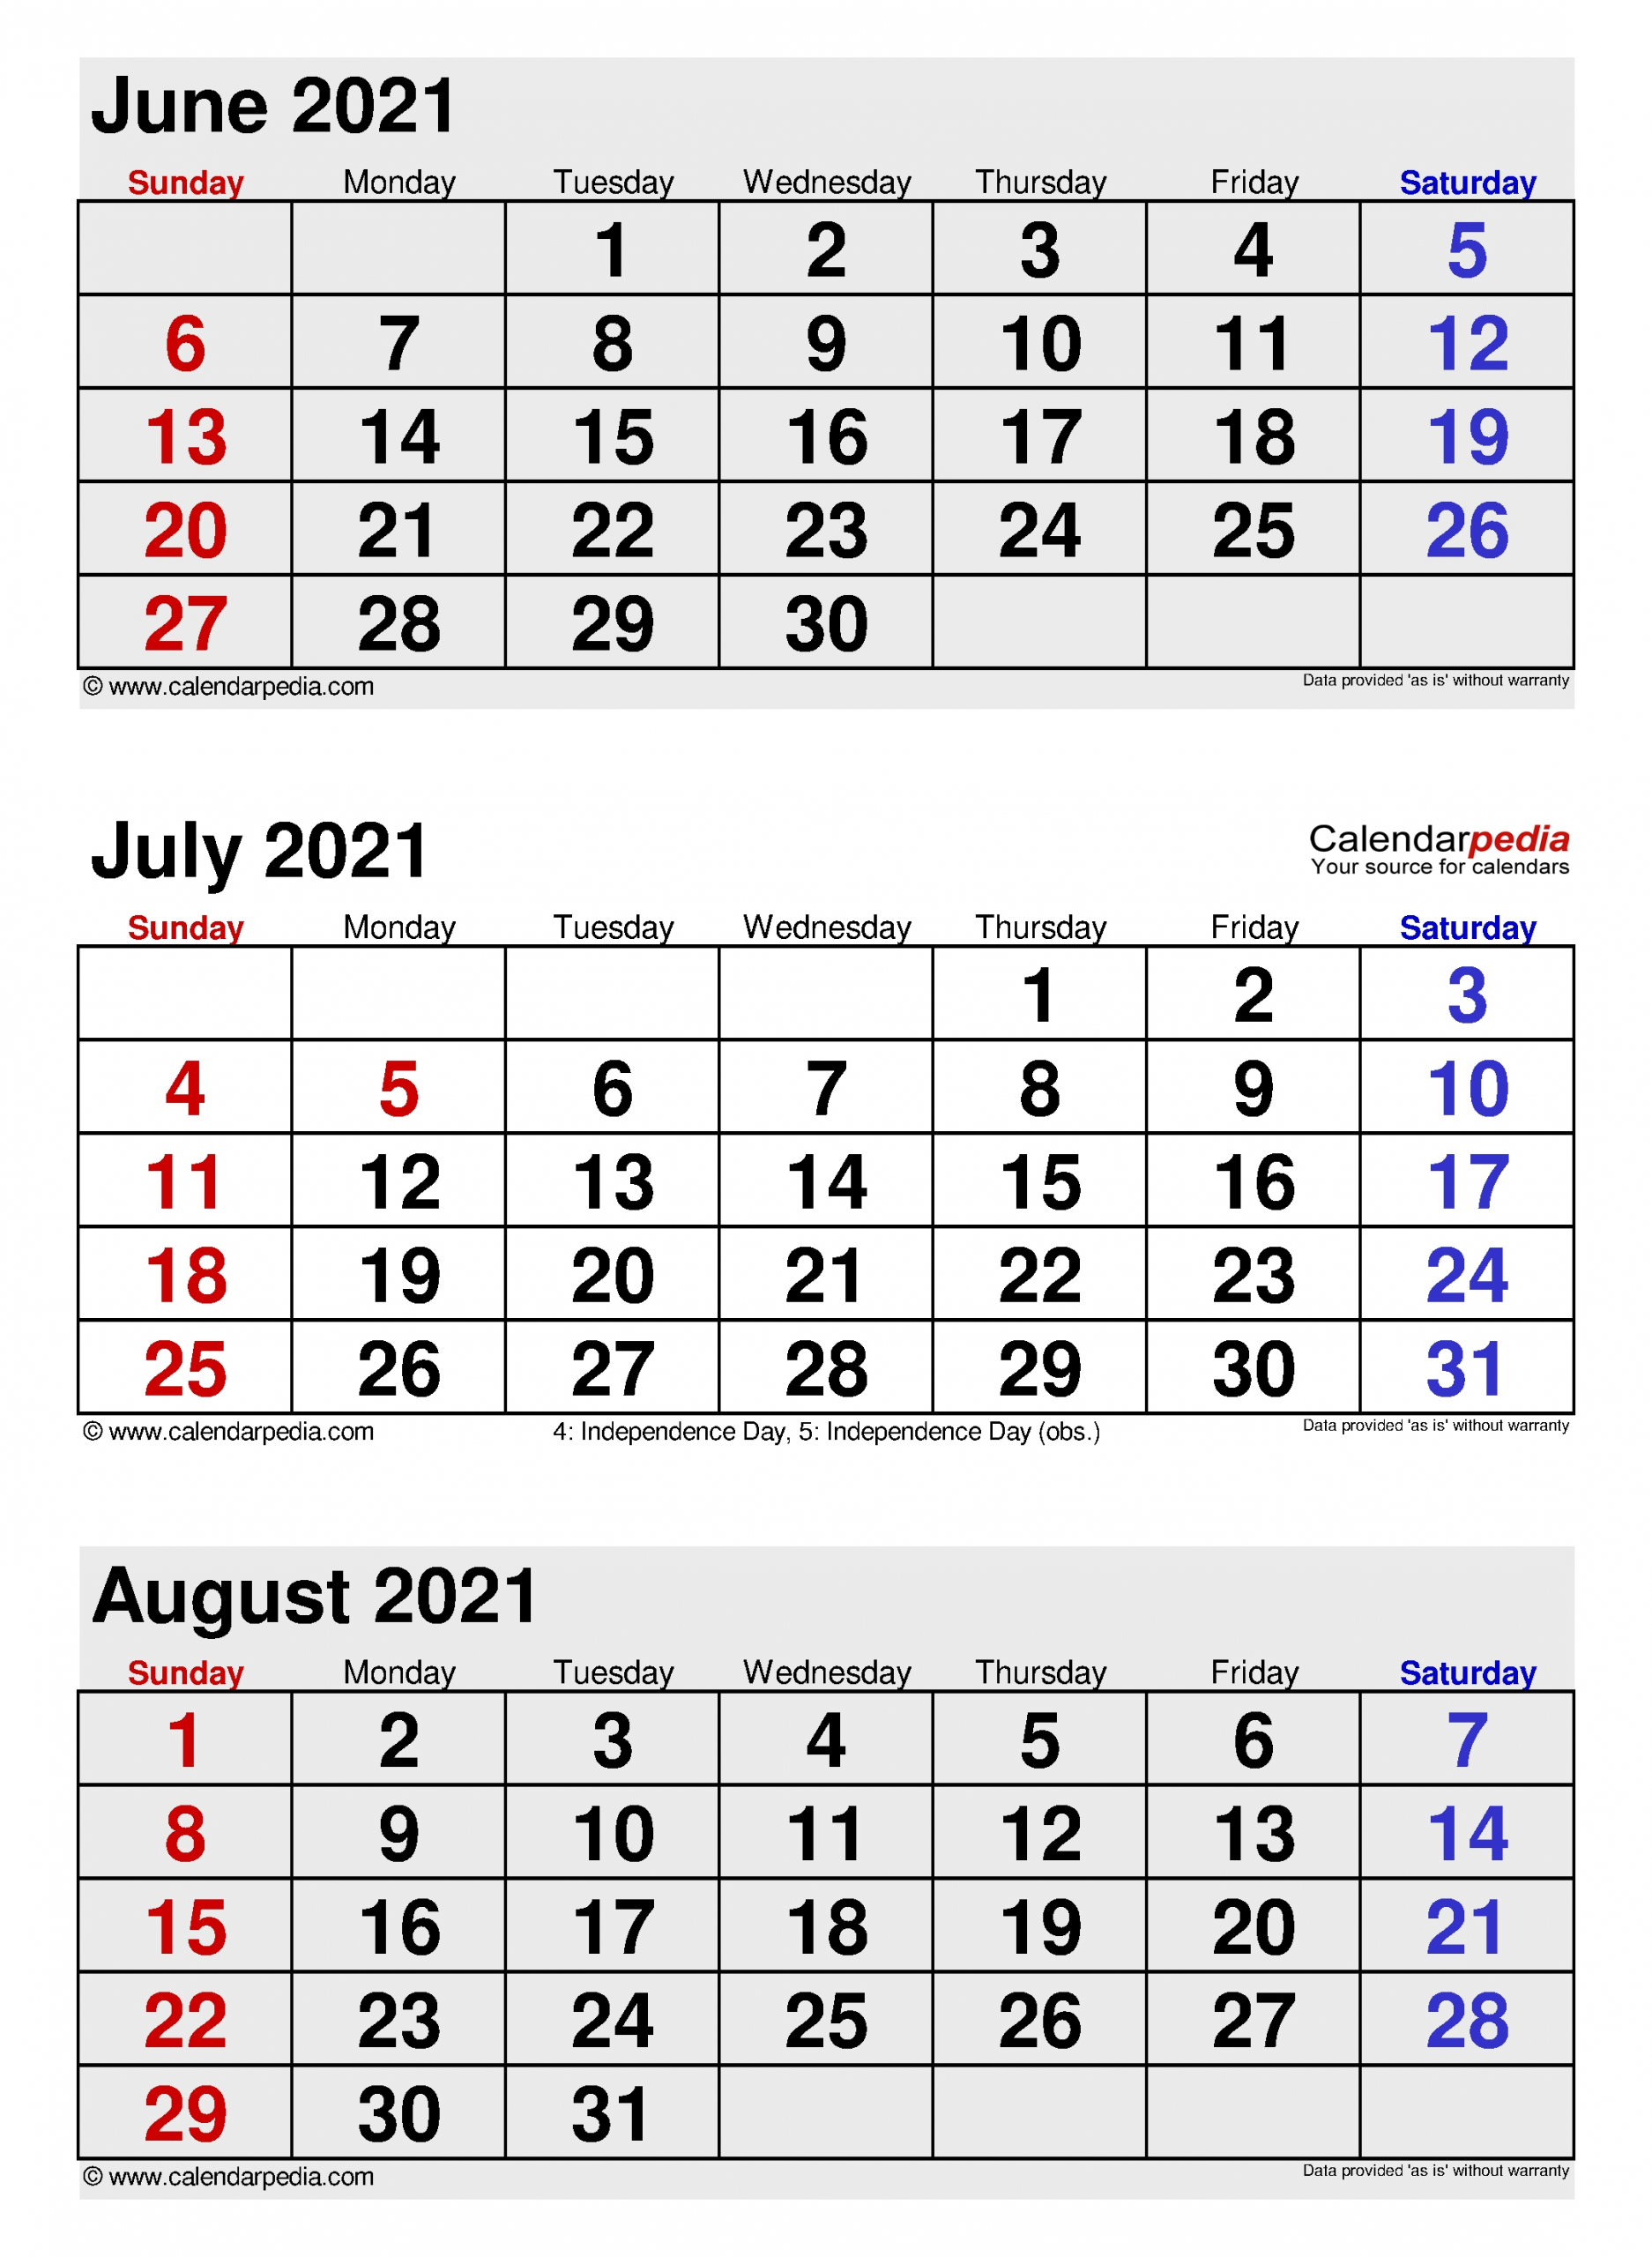 July 2021 Calendar | Templates For Word, Excel And Pdf-June And July 2021 Calendar